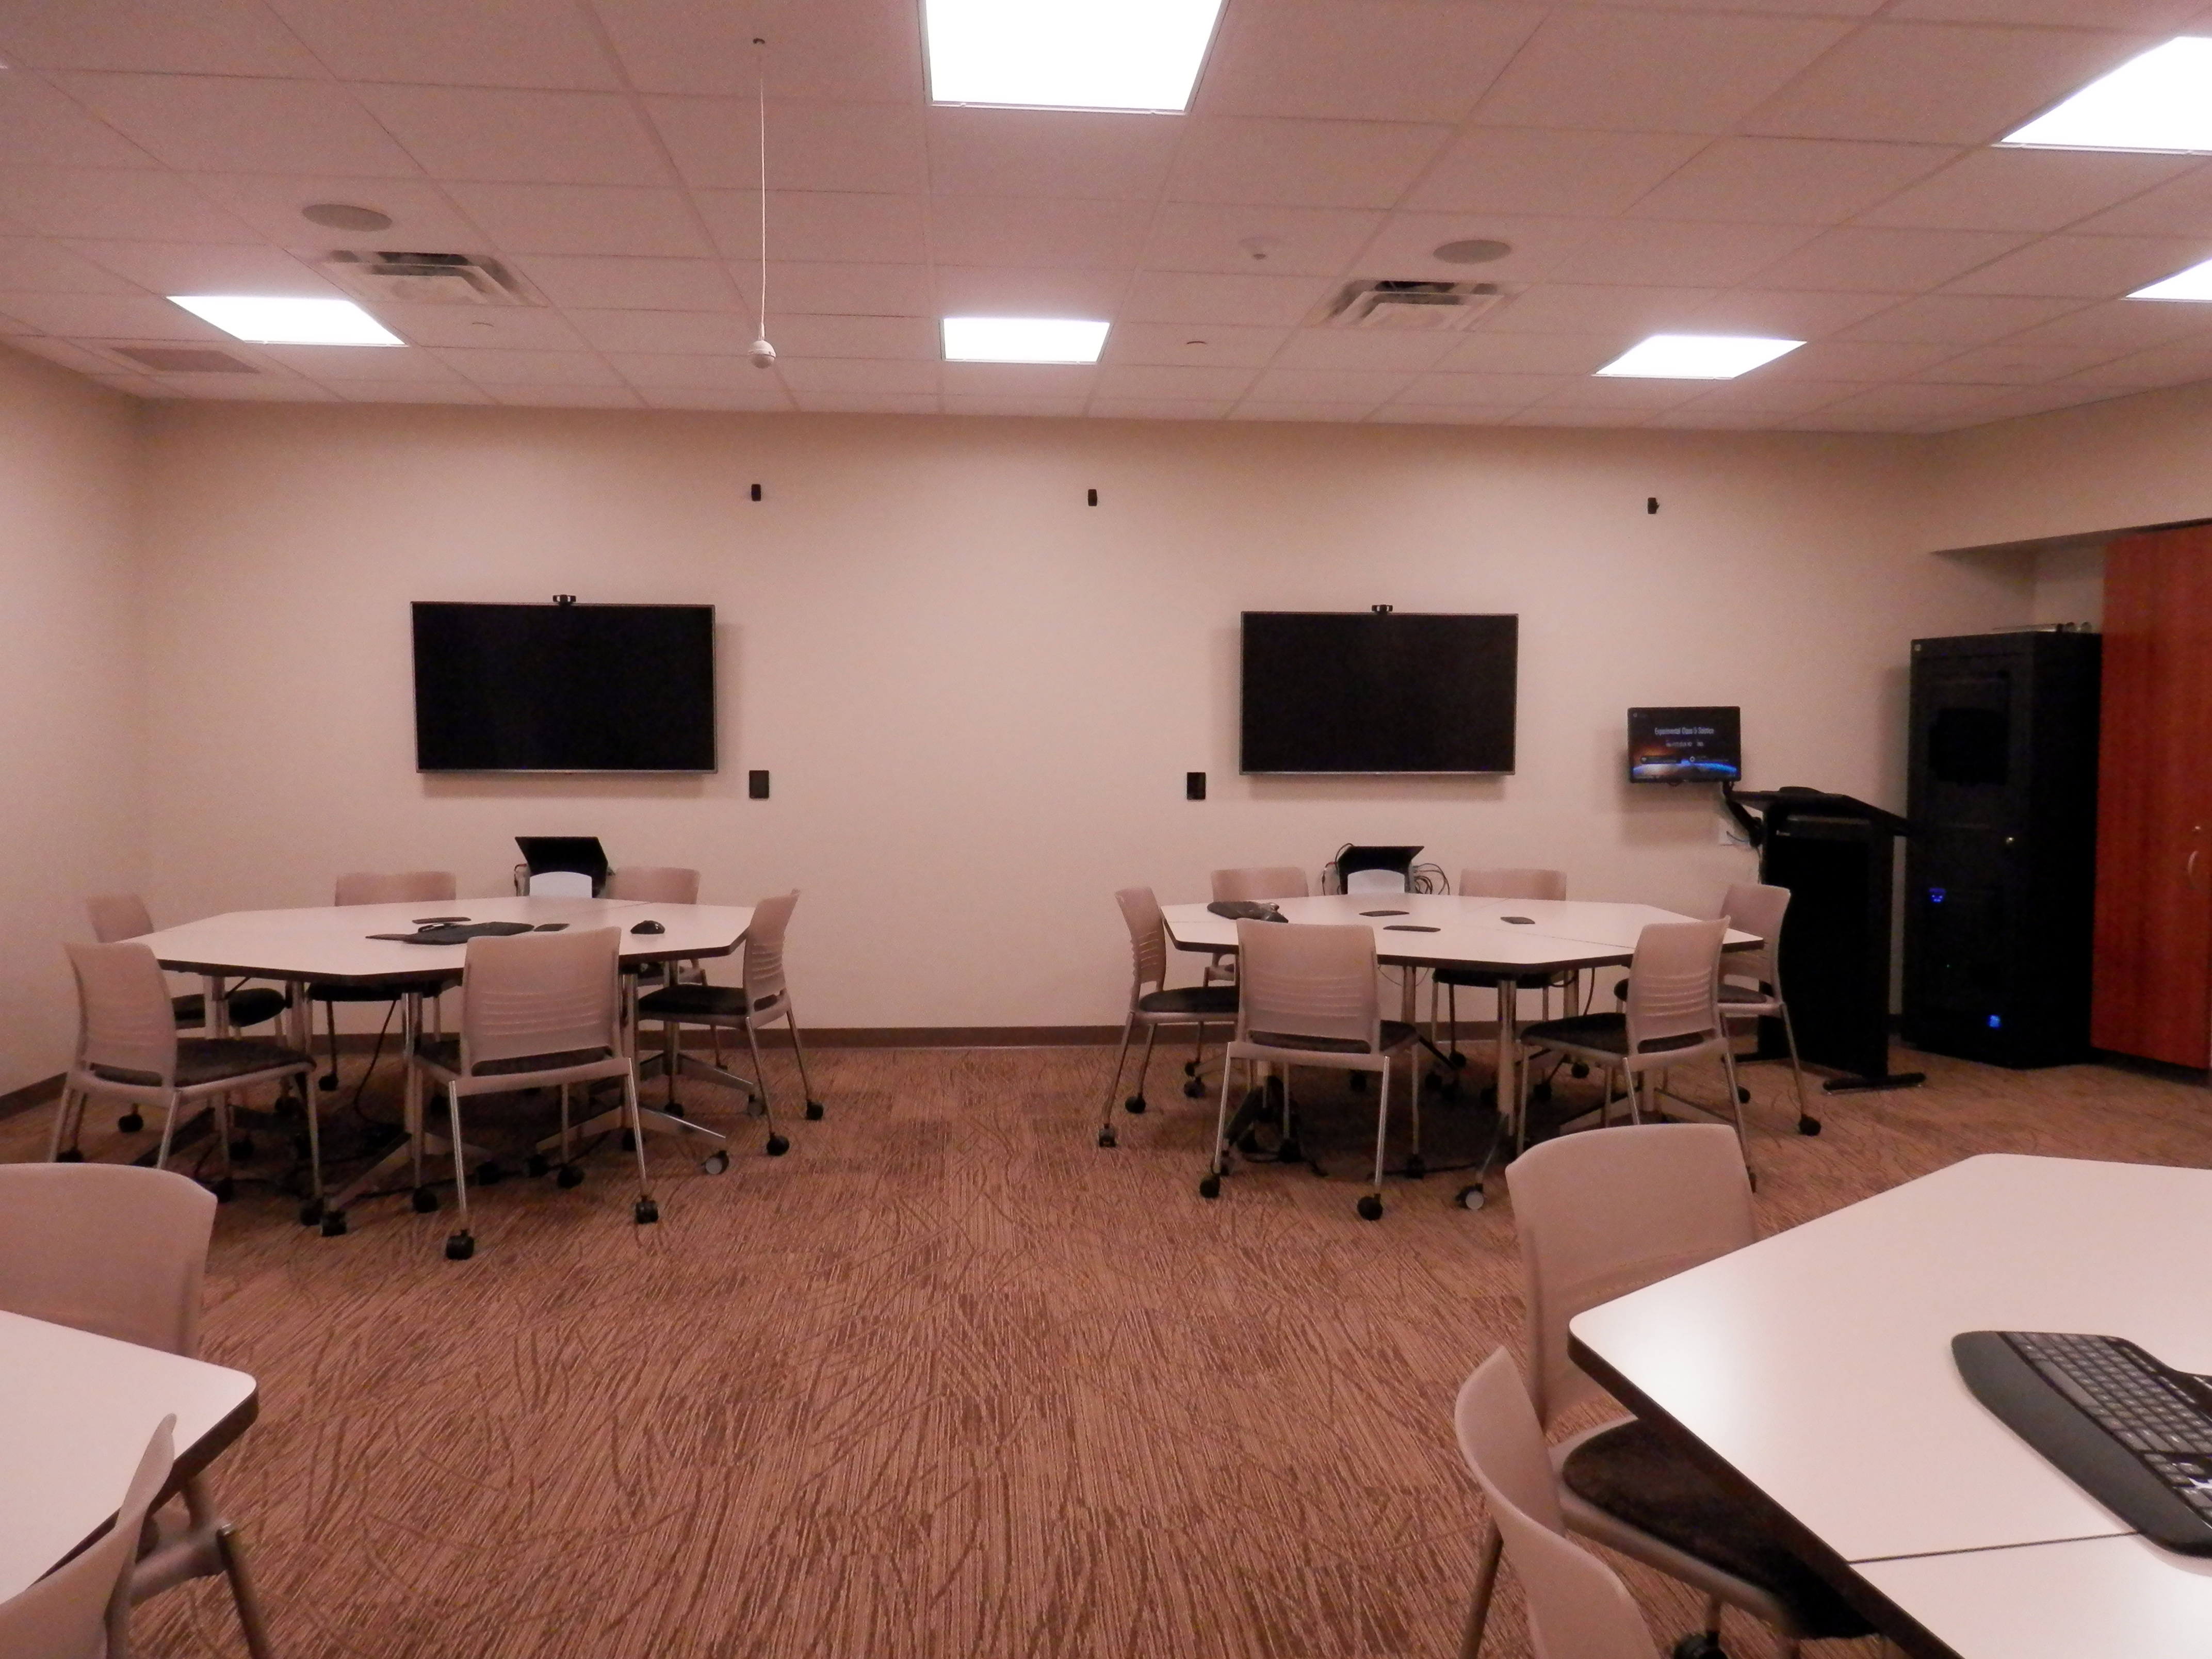 Photo partially reveals the inside of the experimental classroom. There are one ceiling speaker, four 6-seat configurable tables with a monitor on the wall behind each table, one instructor stand and the control closet.